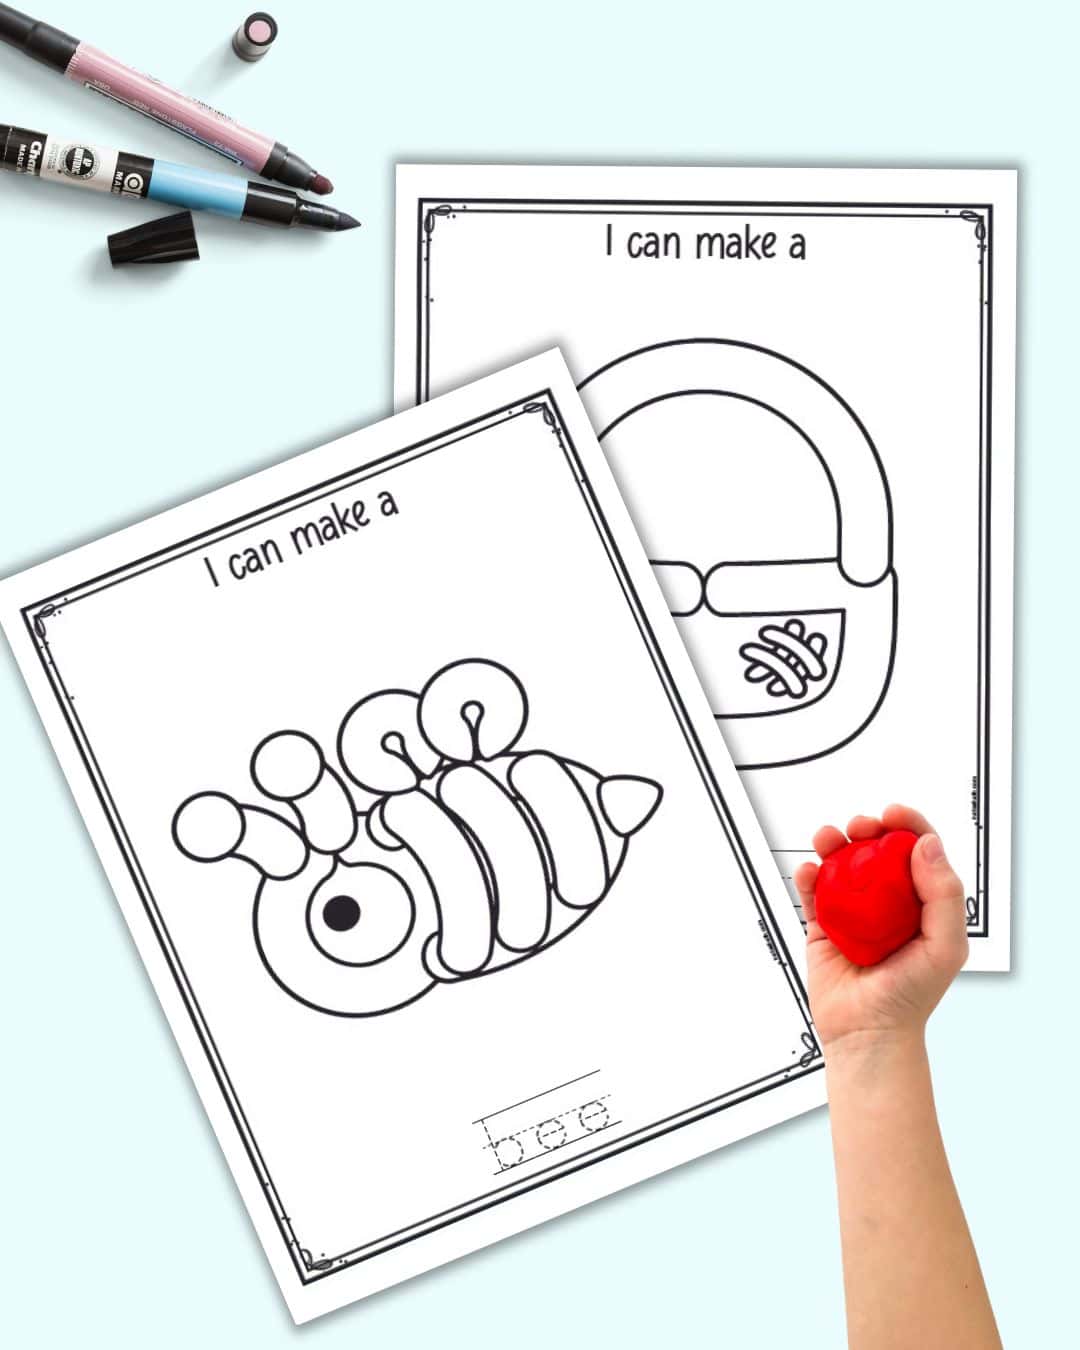 Two black and white play dough mats. One shows a bee and the other a basket. A child's hand holding a ball of red play dough is also in the frame